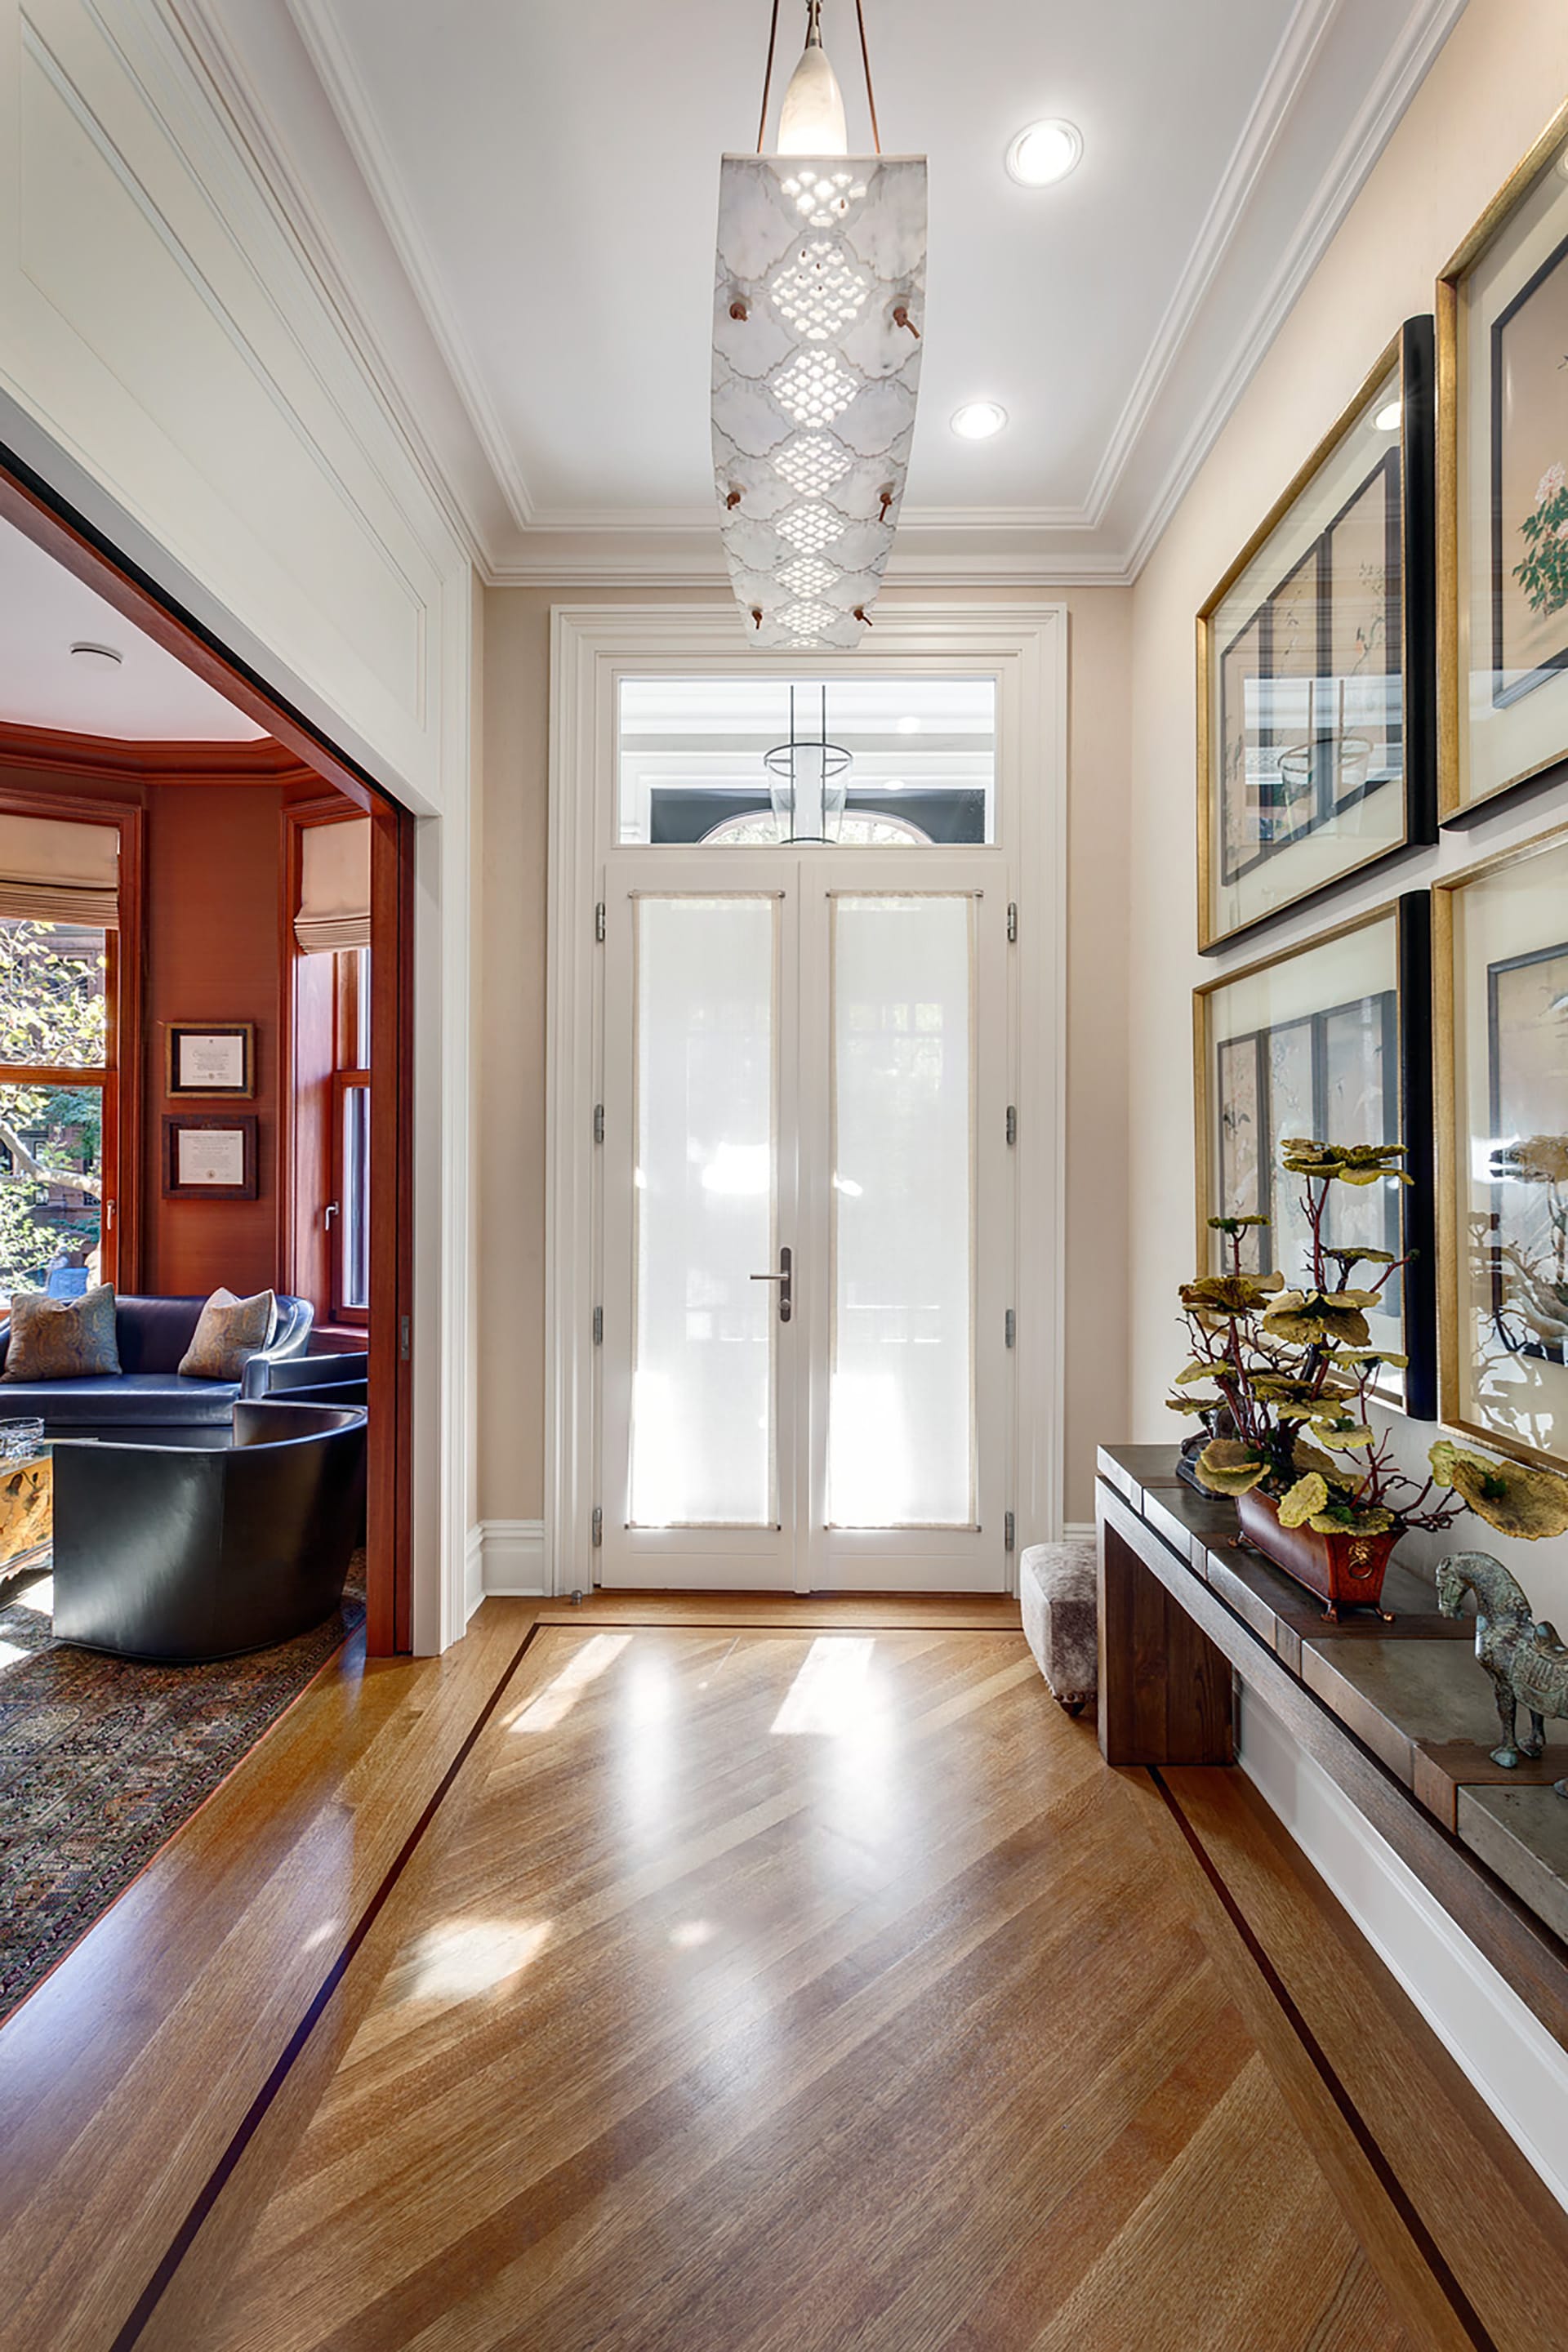 Restored entryway with new vestibule, white molding detail and a large decorative light fixture